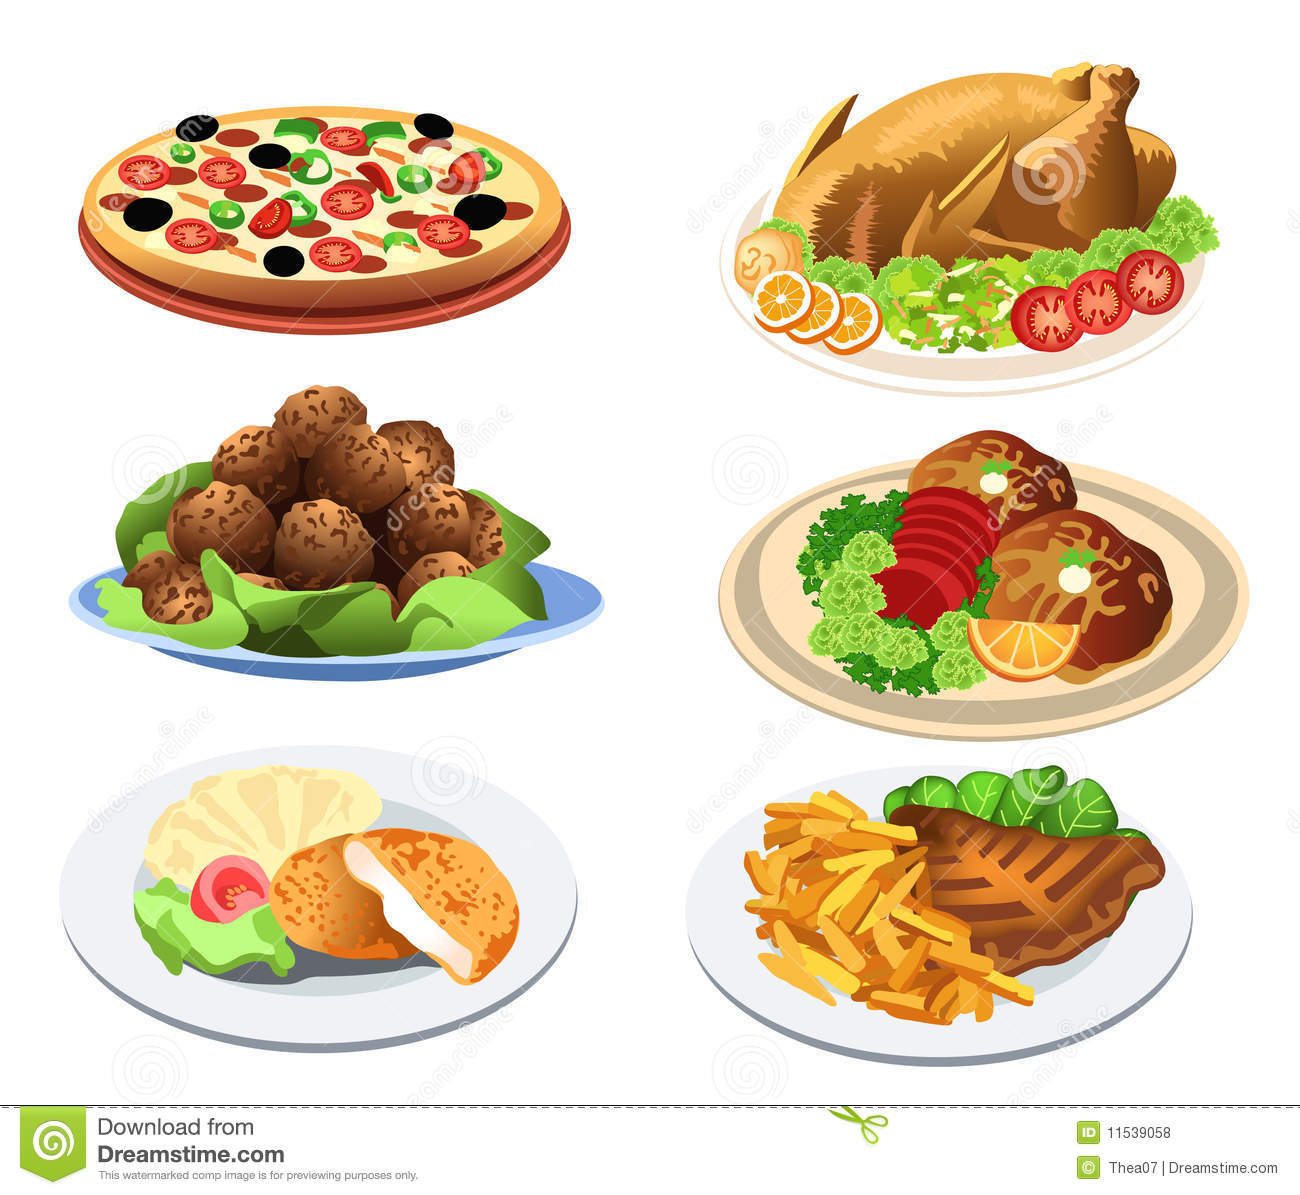 Illustration Of Several Food Dishes You Can Serve At A Restaurant